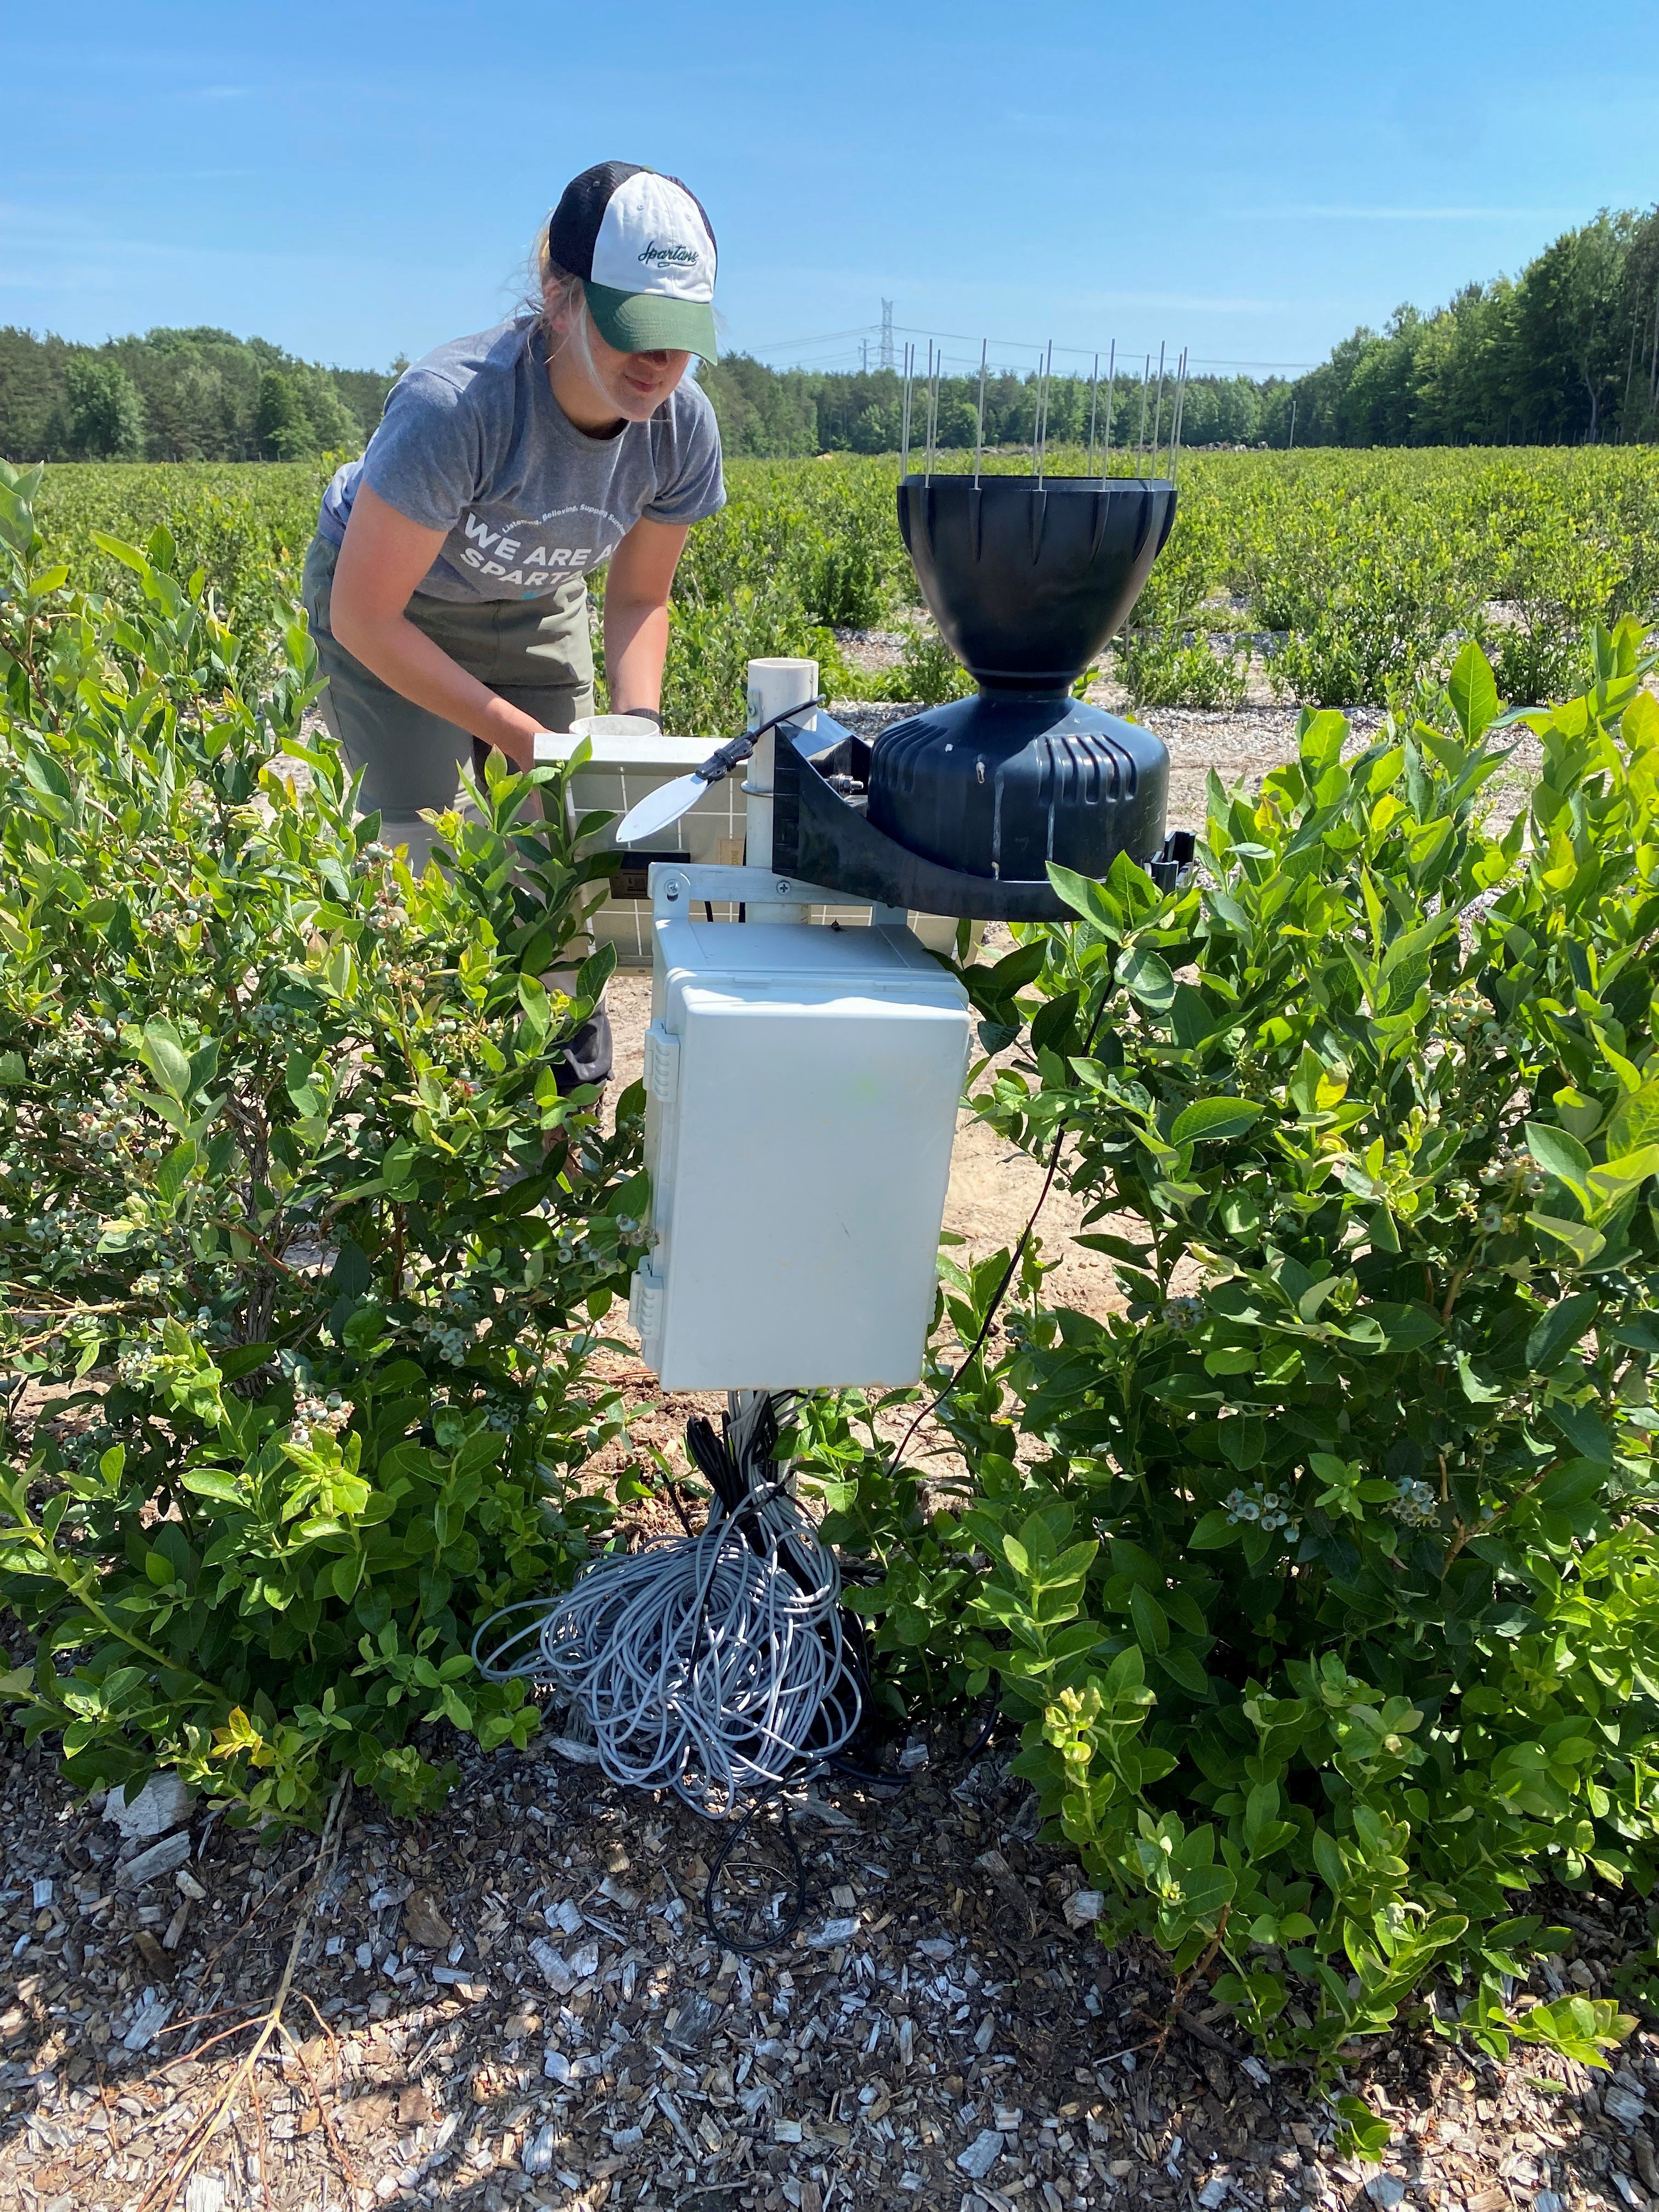 Student using Low-Cost Monitoring System on Blueberry plant